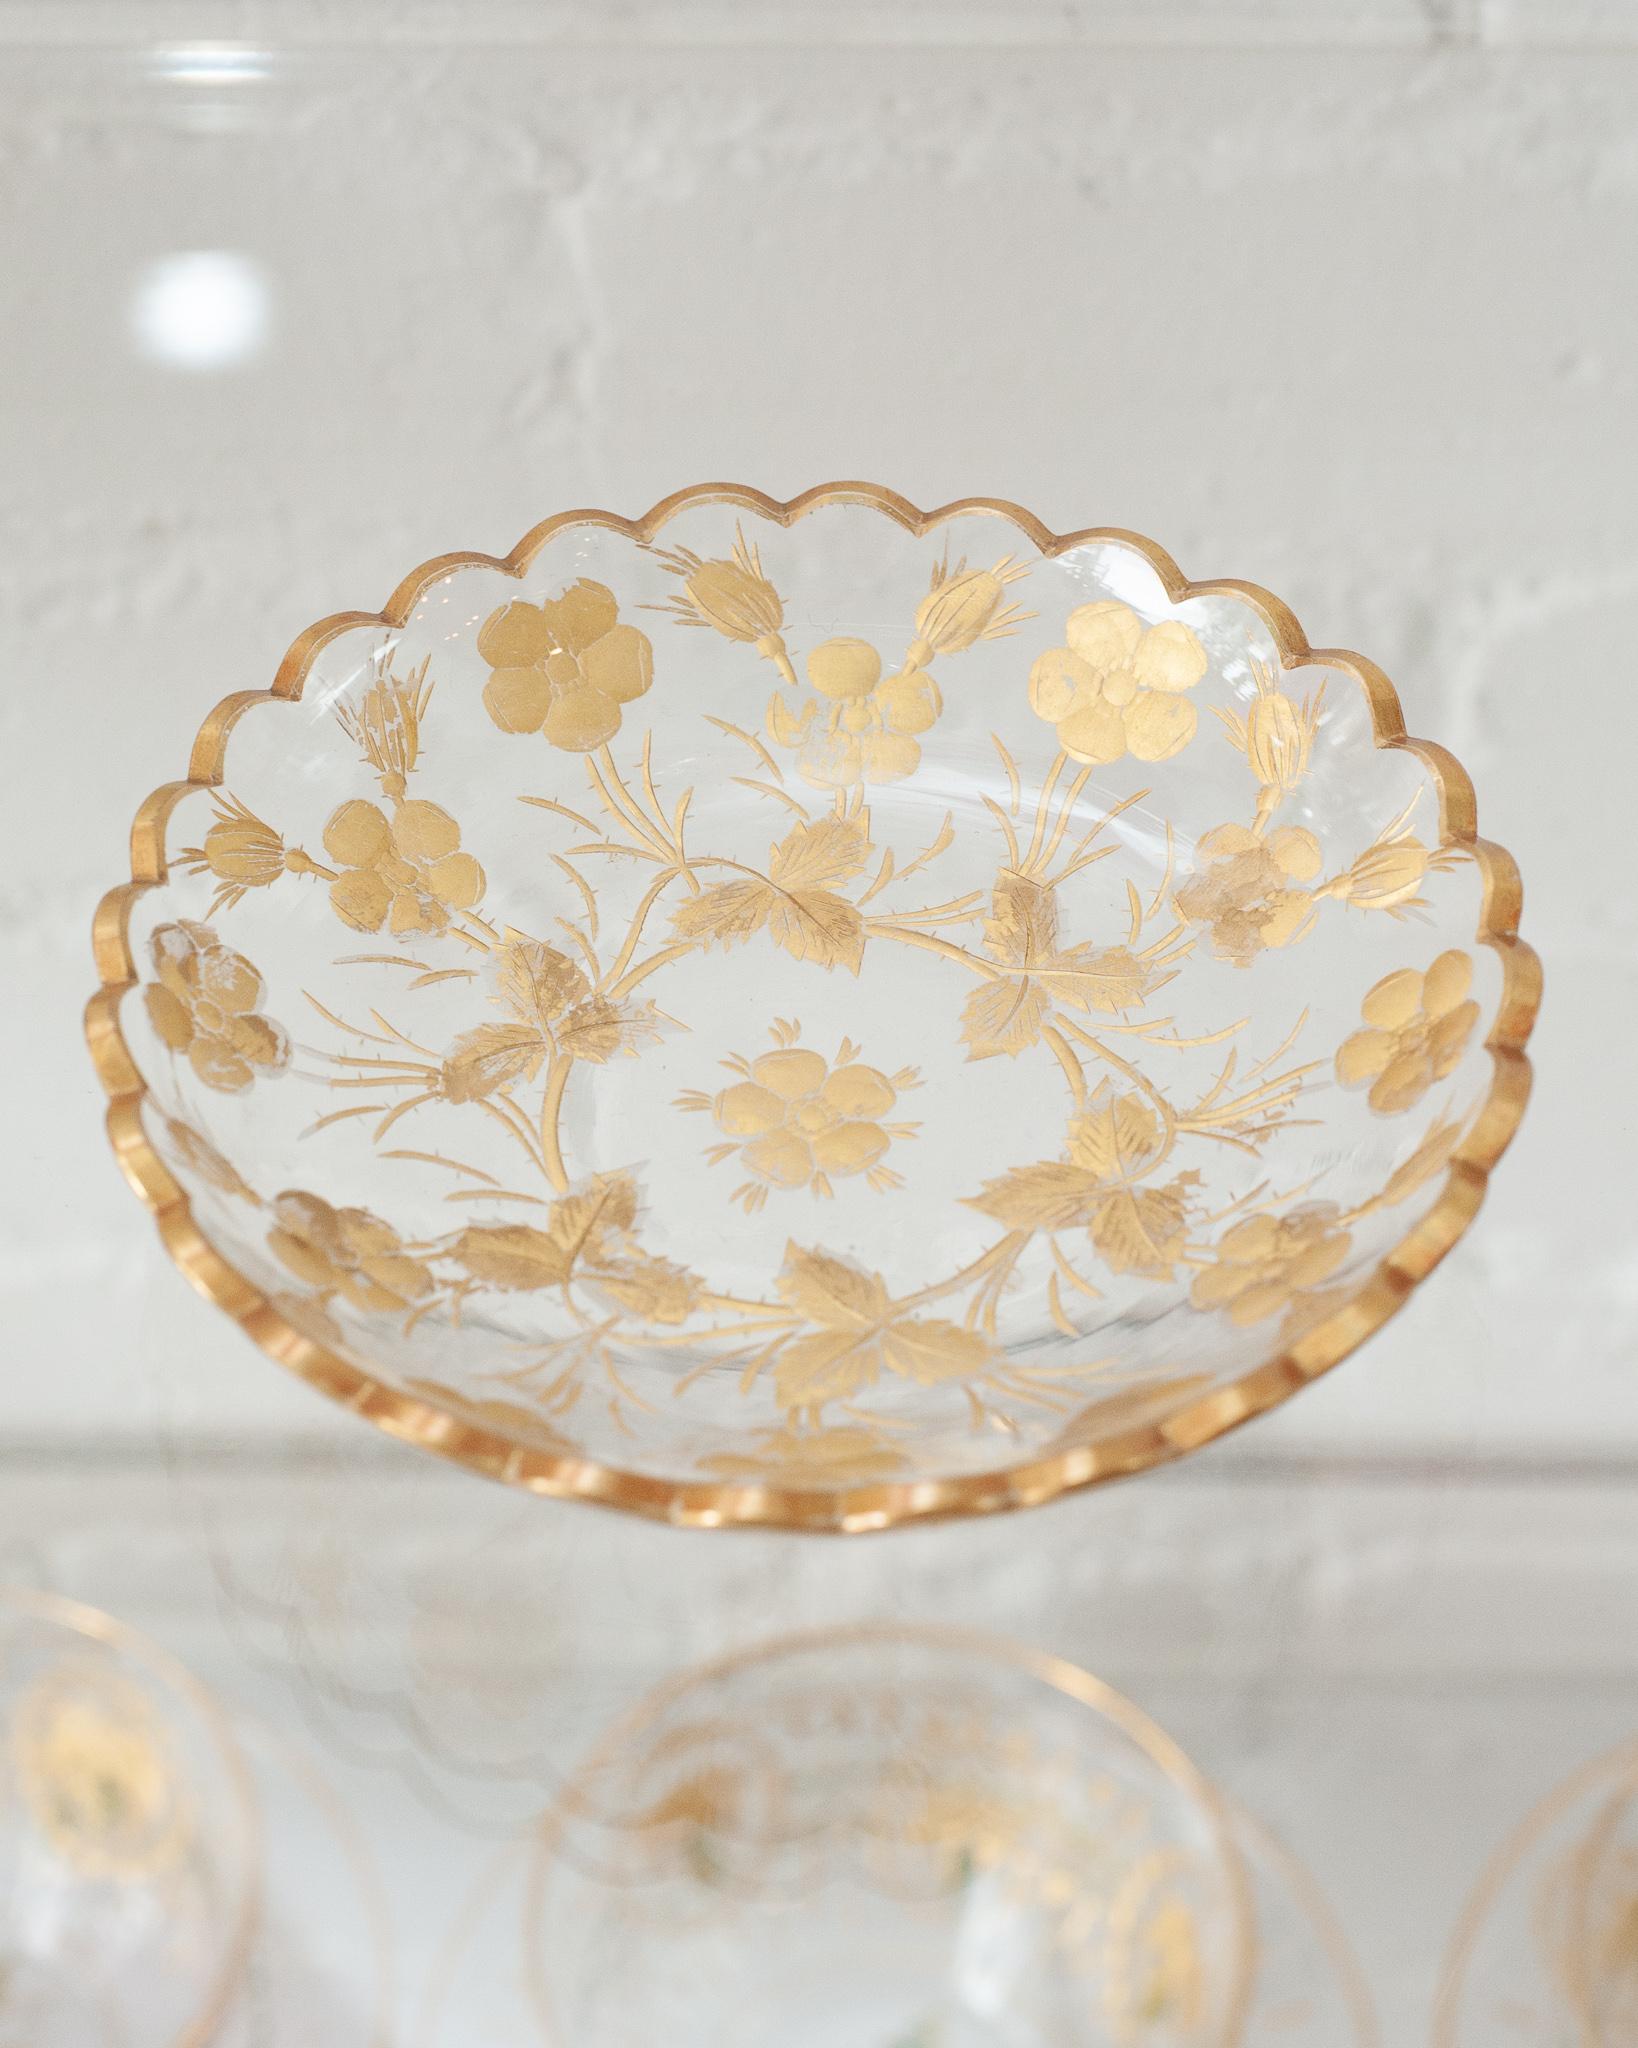 An ornately etched and gilded antique Moser crystal bowl with scalloped edge. A fine example of top quality craftsmanship from the turn of the century. Perfect for decorative or serving use.